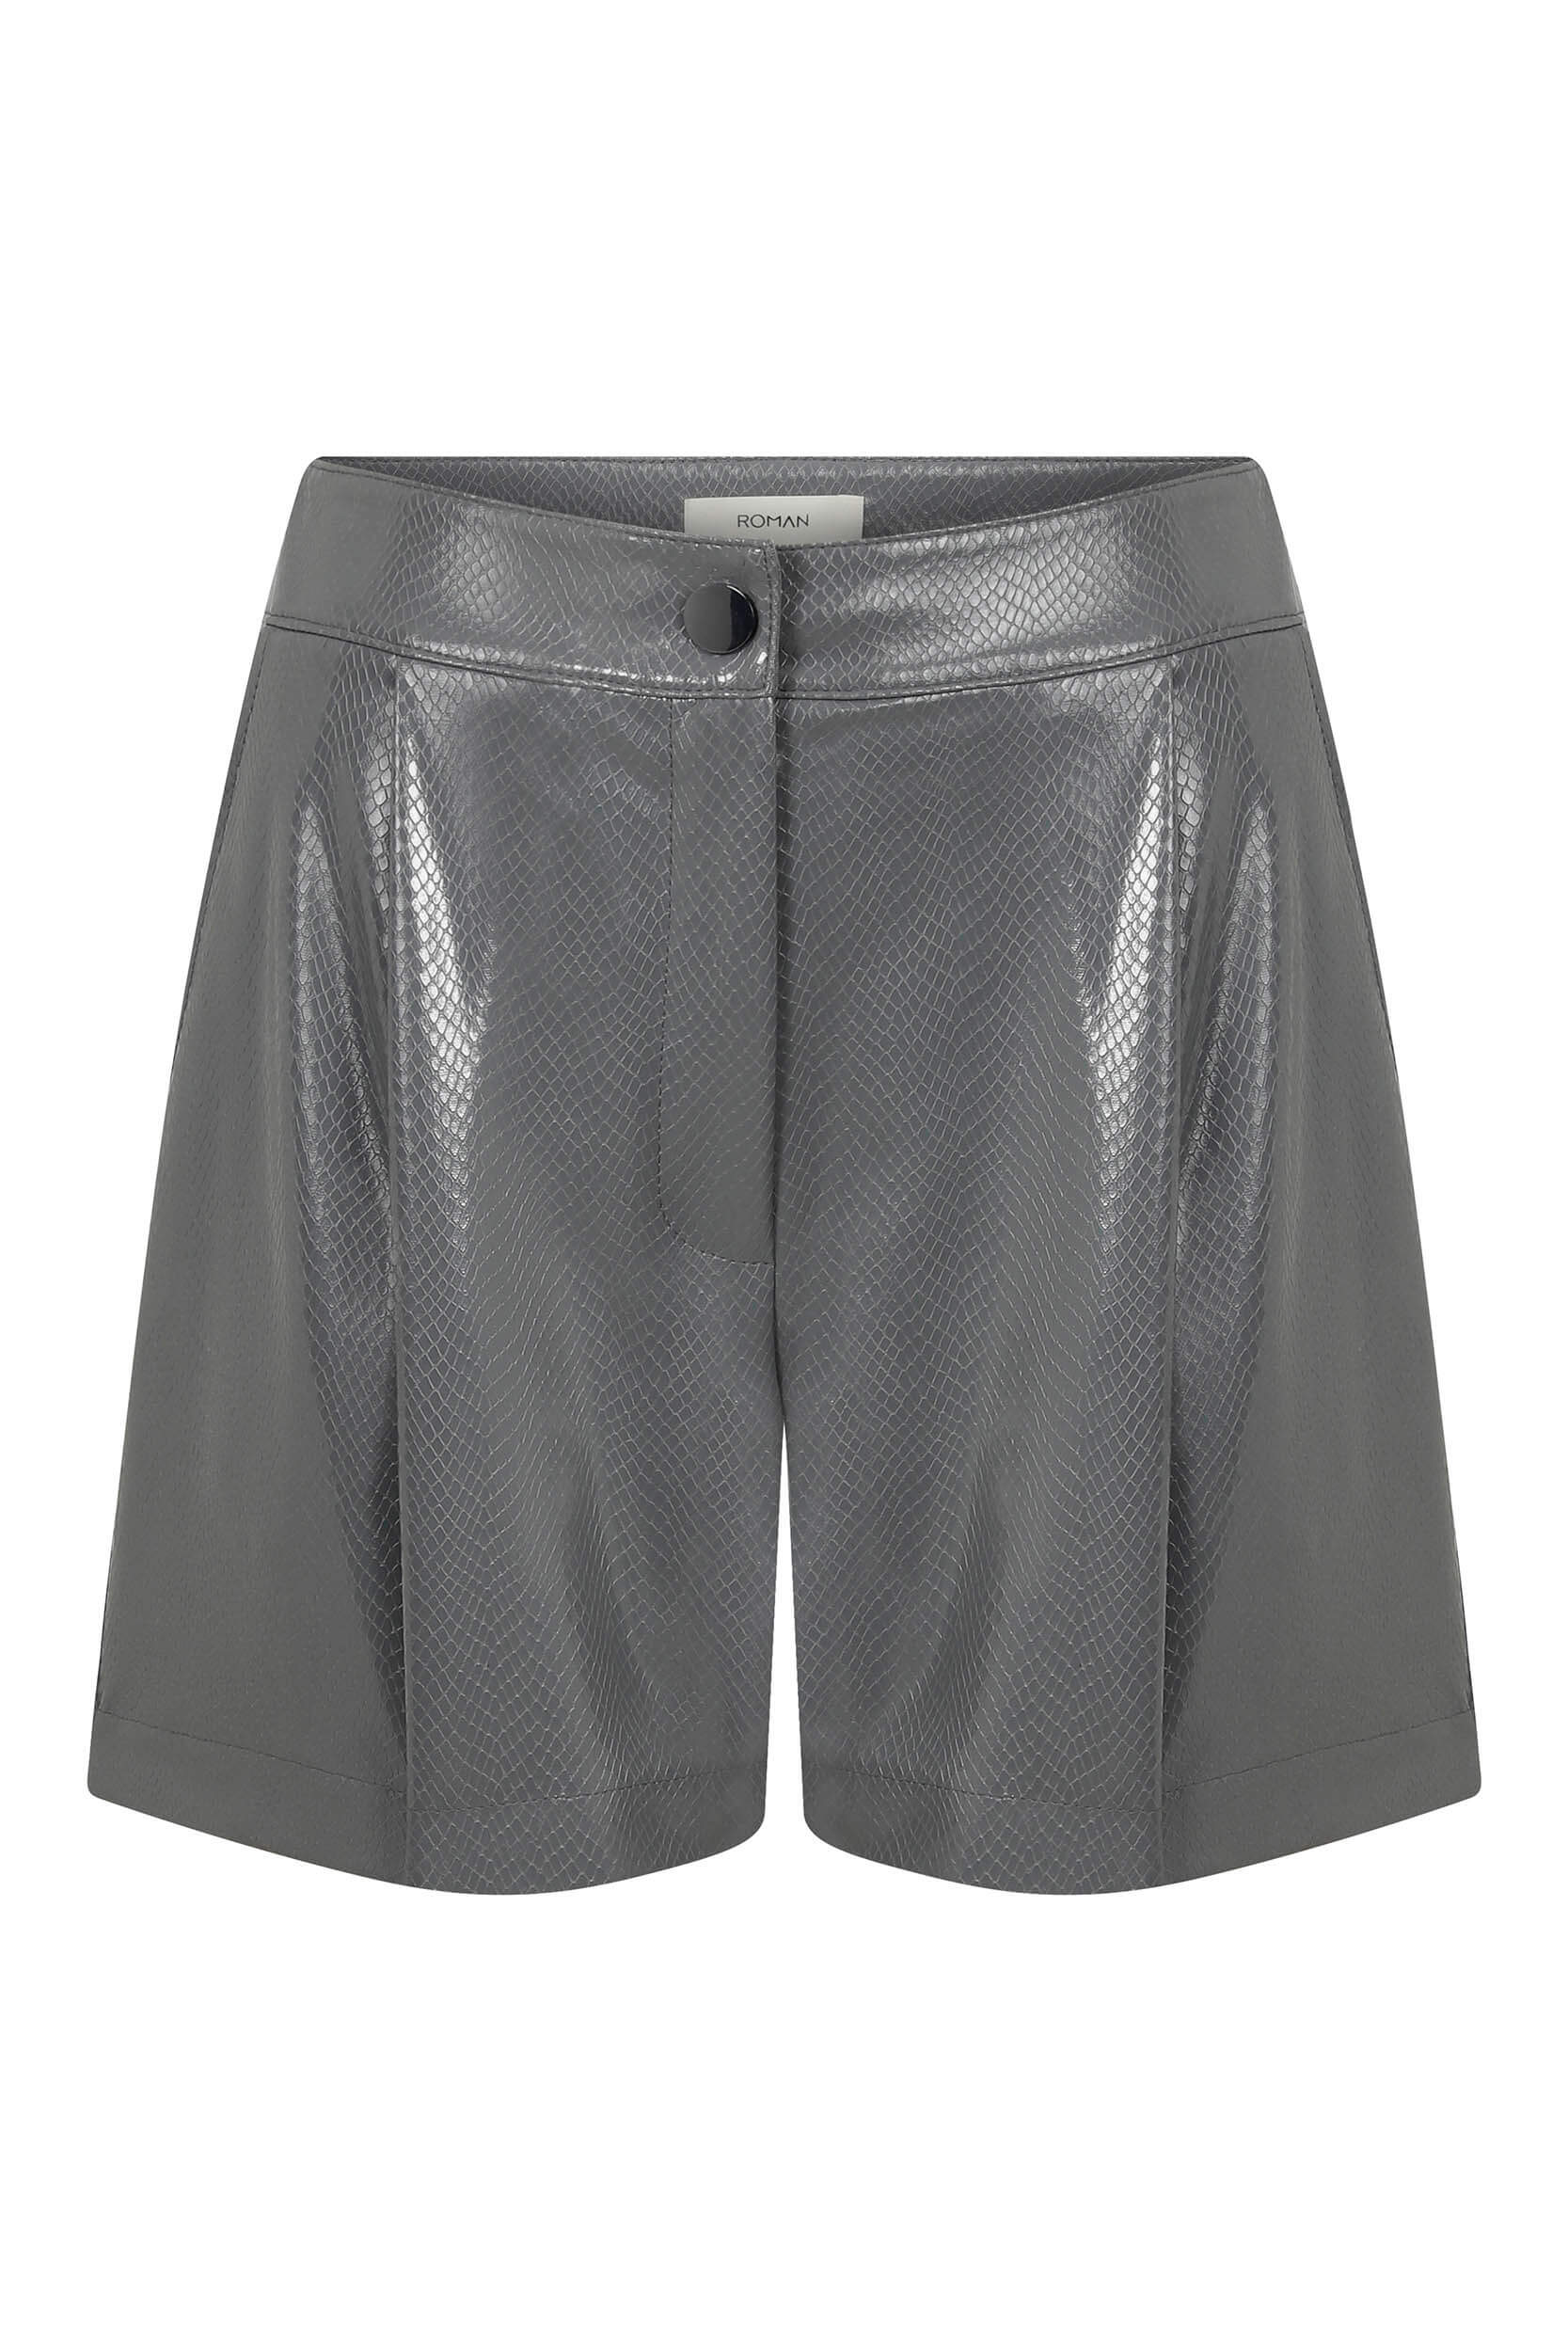 What to Wear With Leather Shorts - the gray details